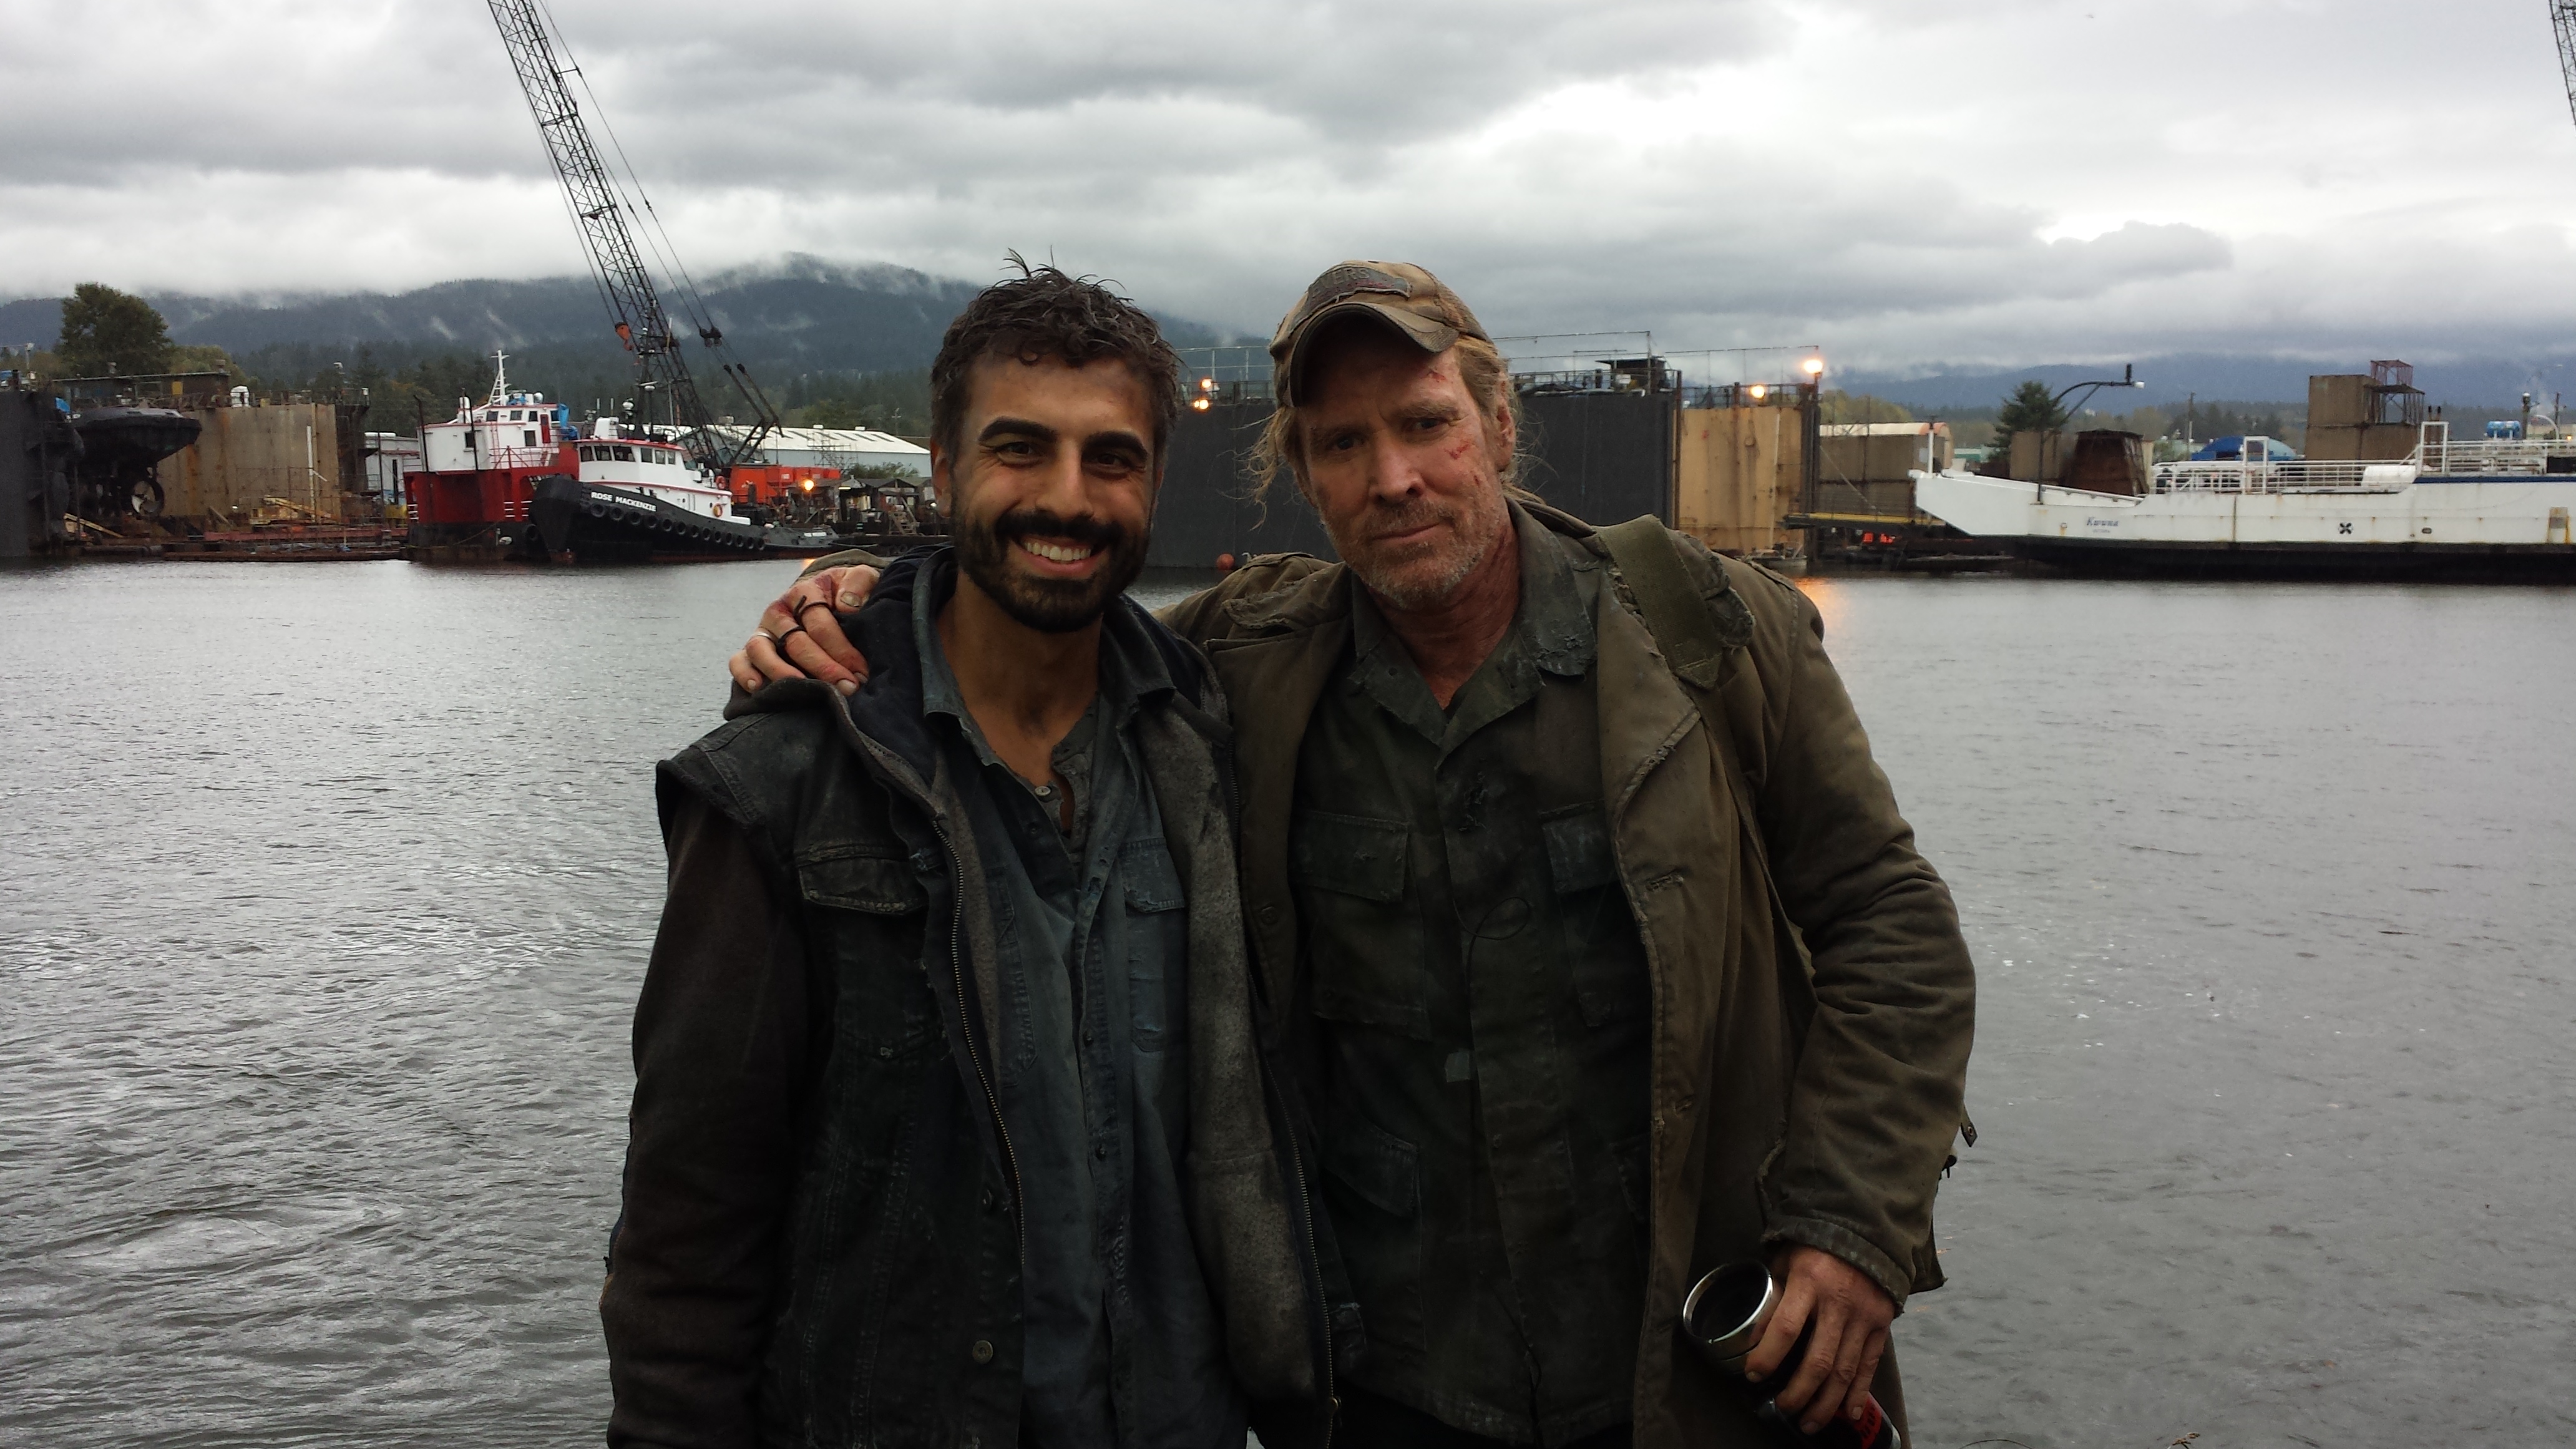 On a break during the shooting of Falling Skies with Michael Antonakos and Will Patton.